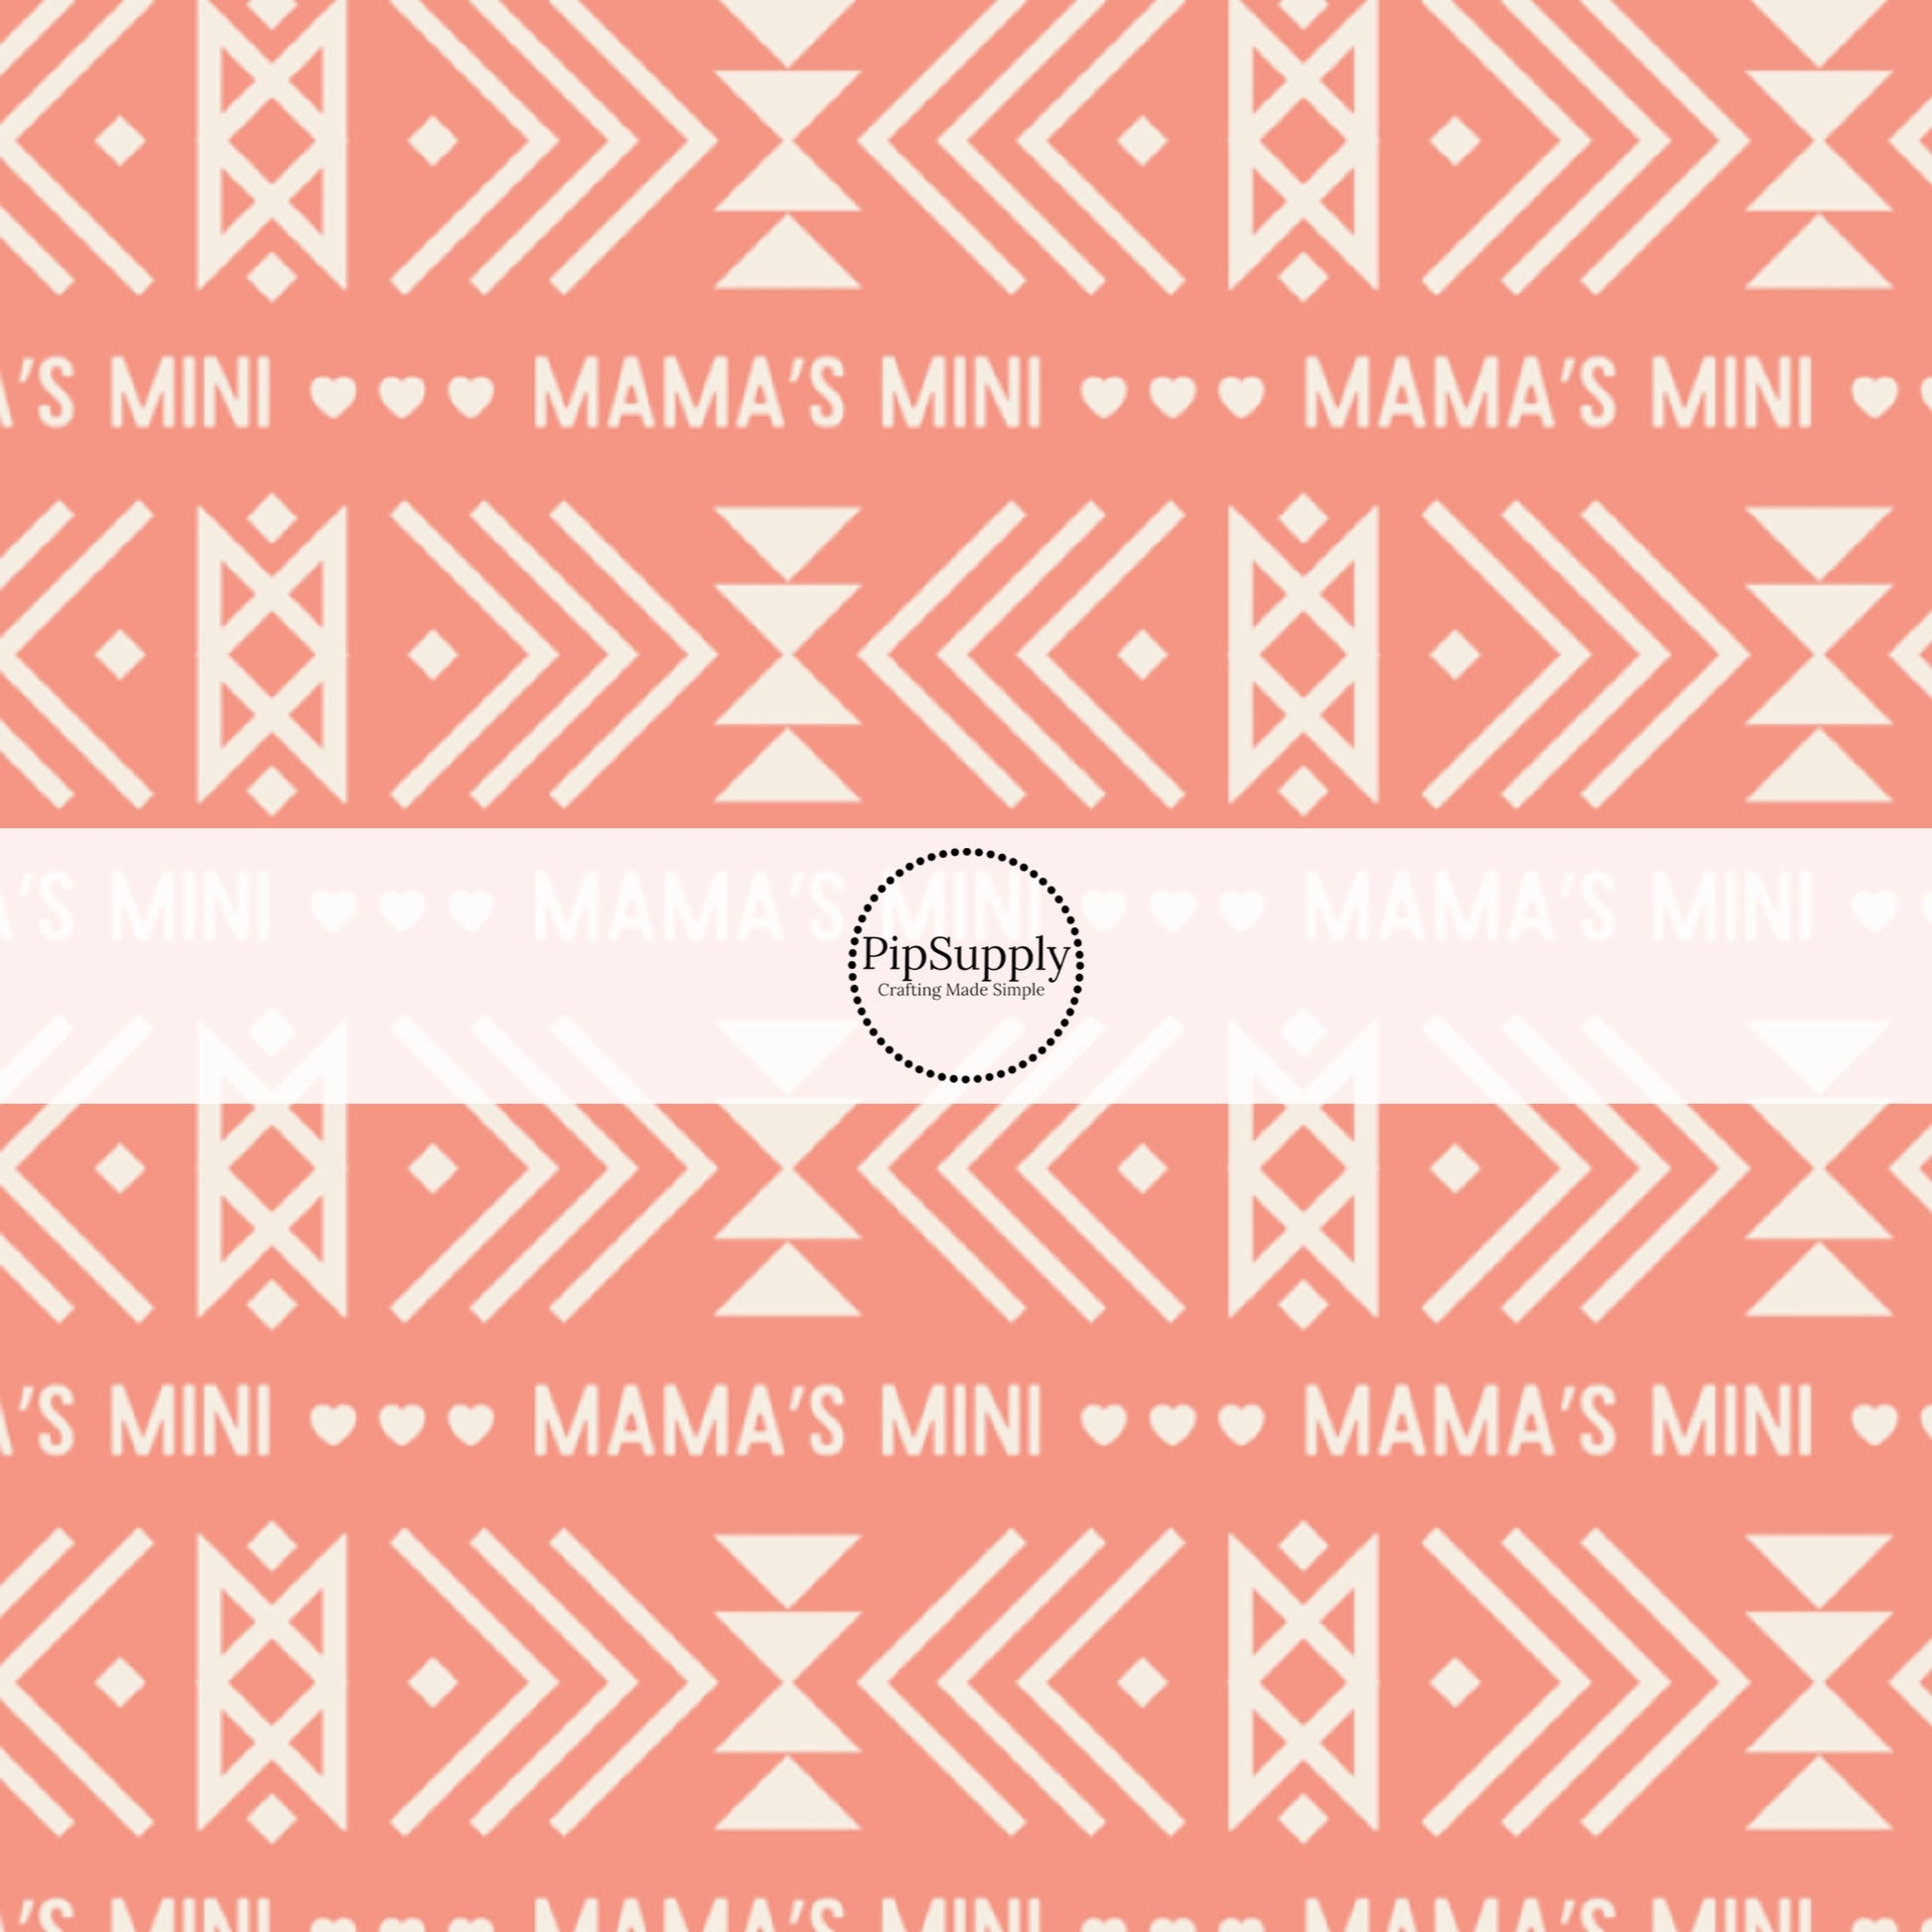 "Mama's Mini" Aztec Print on Coral Fabric by the Yard.